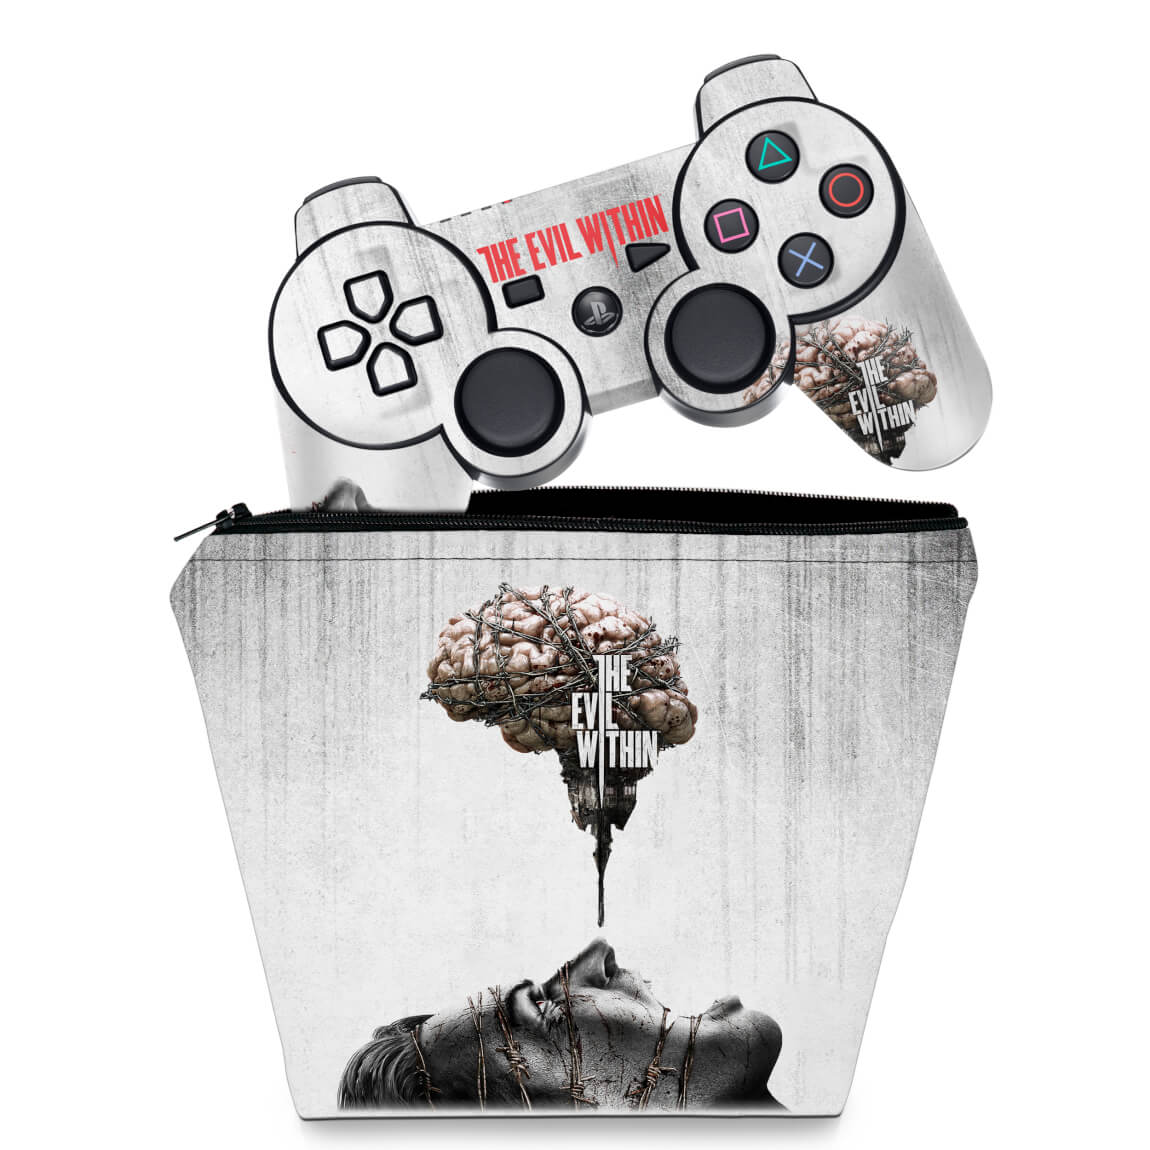 THE EVIL WITHIN PS3, PS3